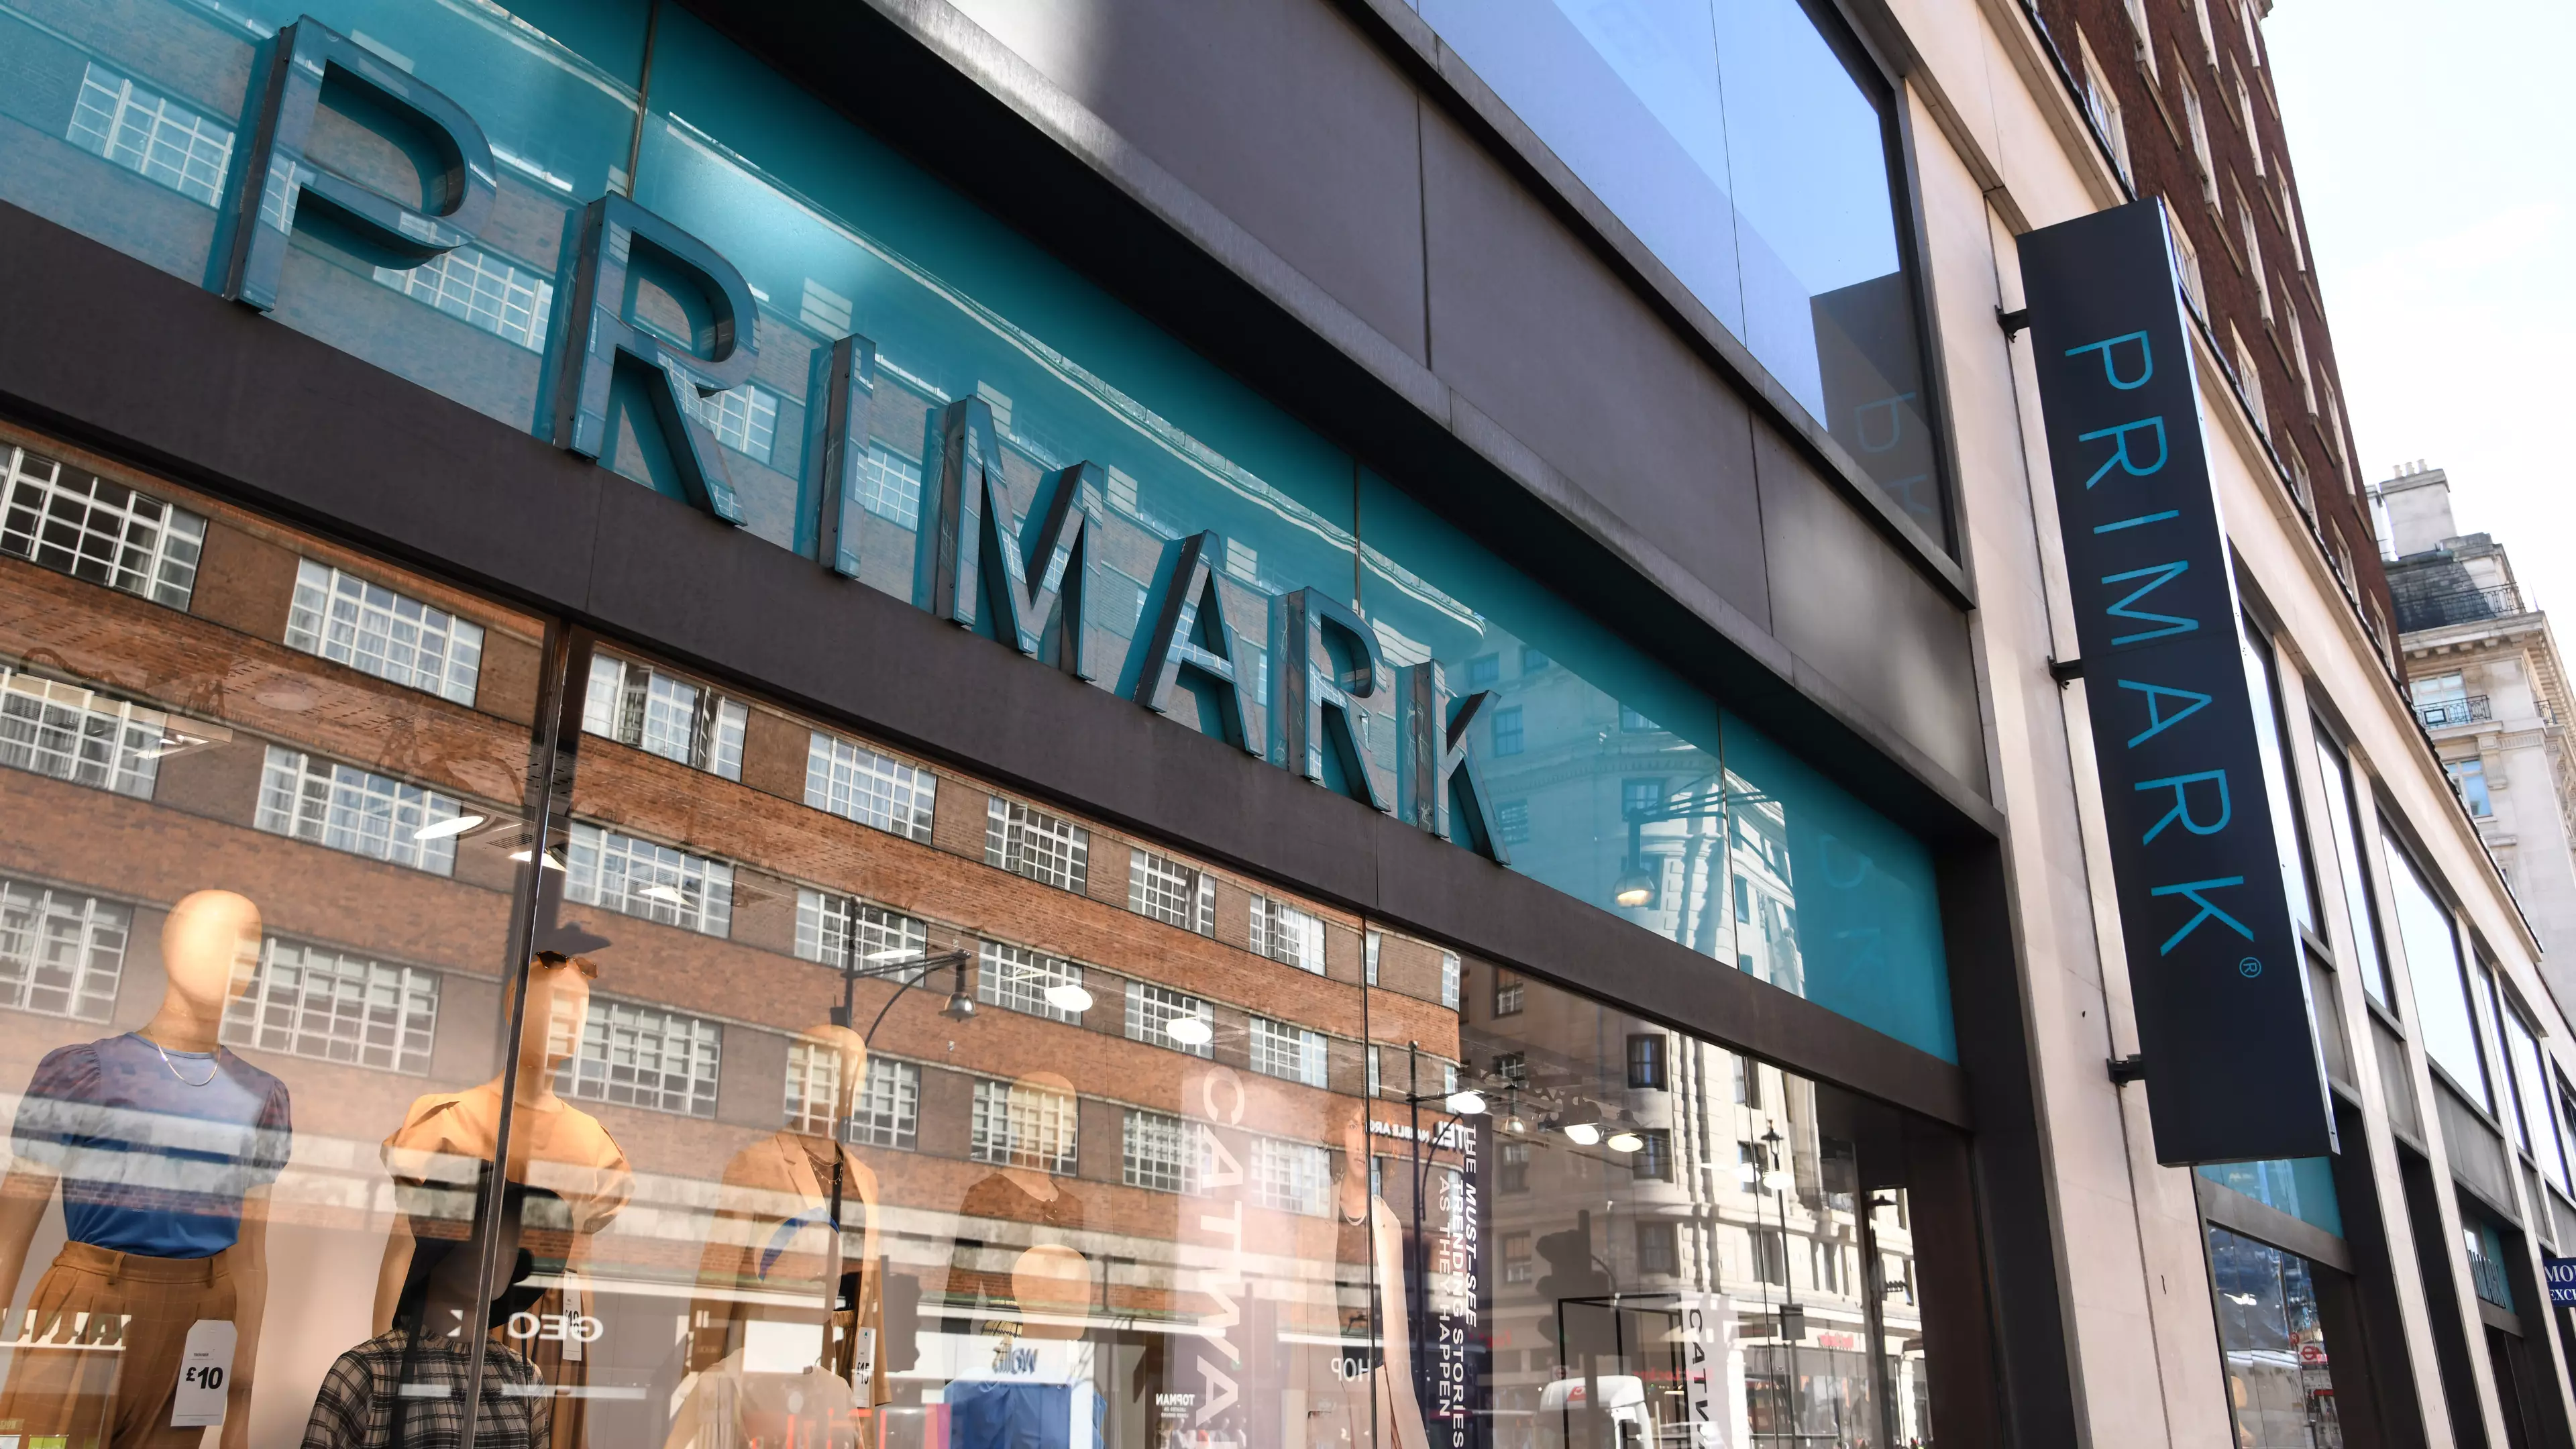 Primark Will Re-Open Stores In England On 15 June